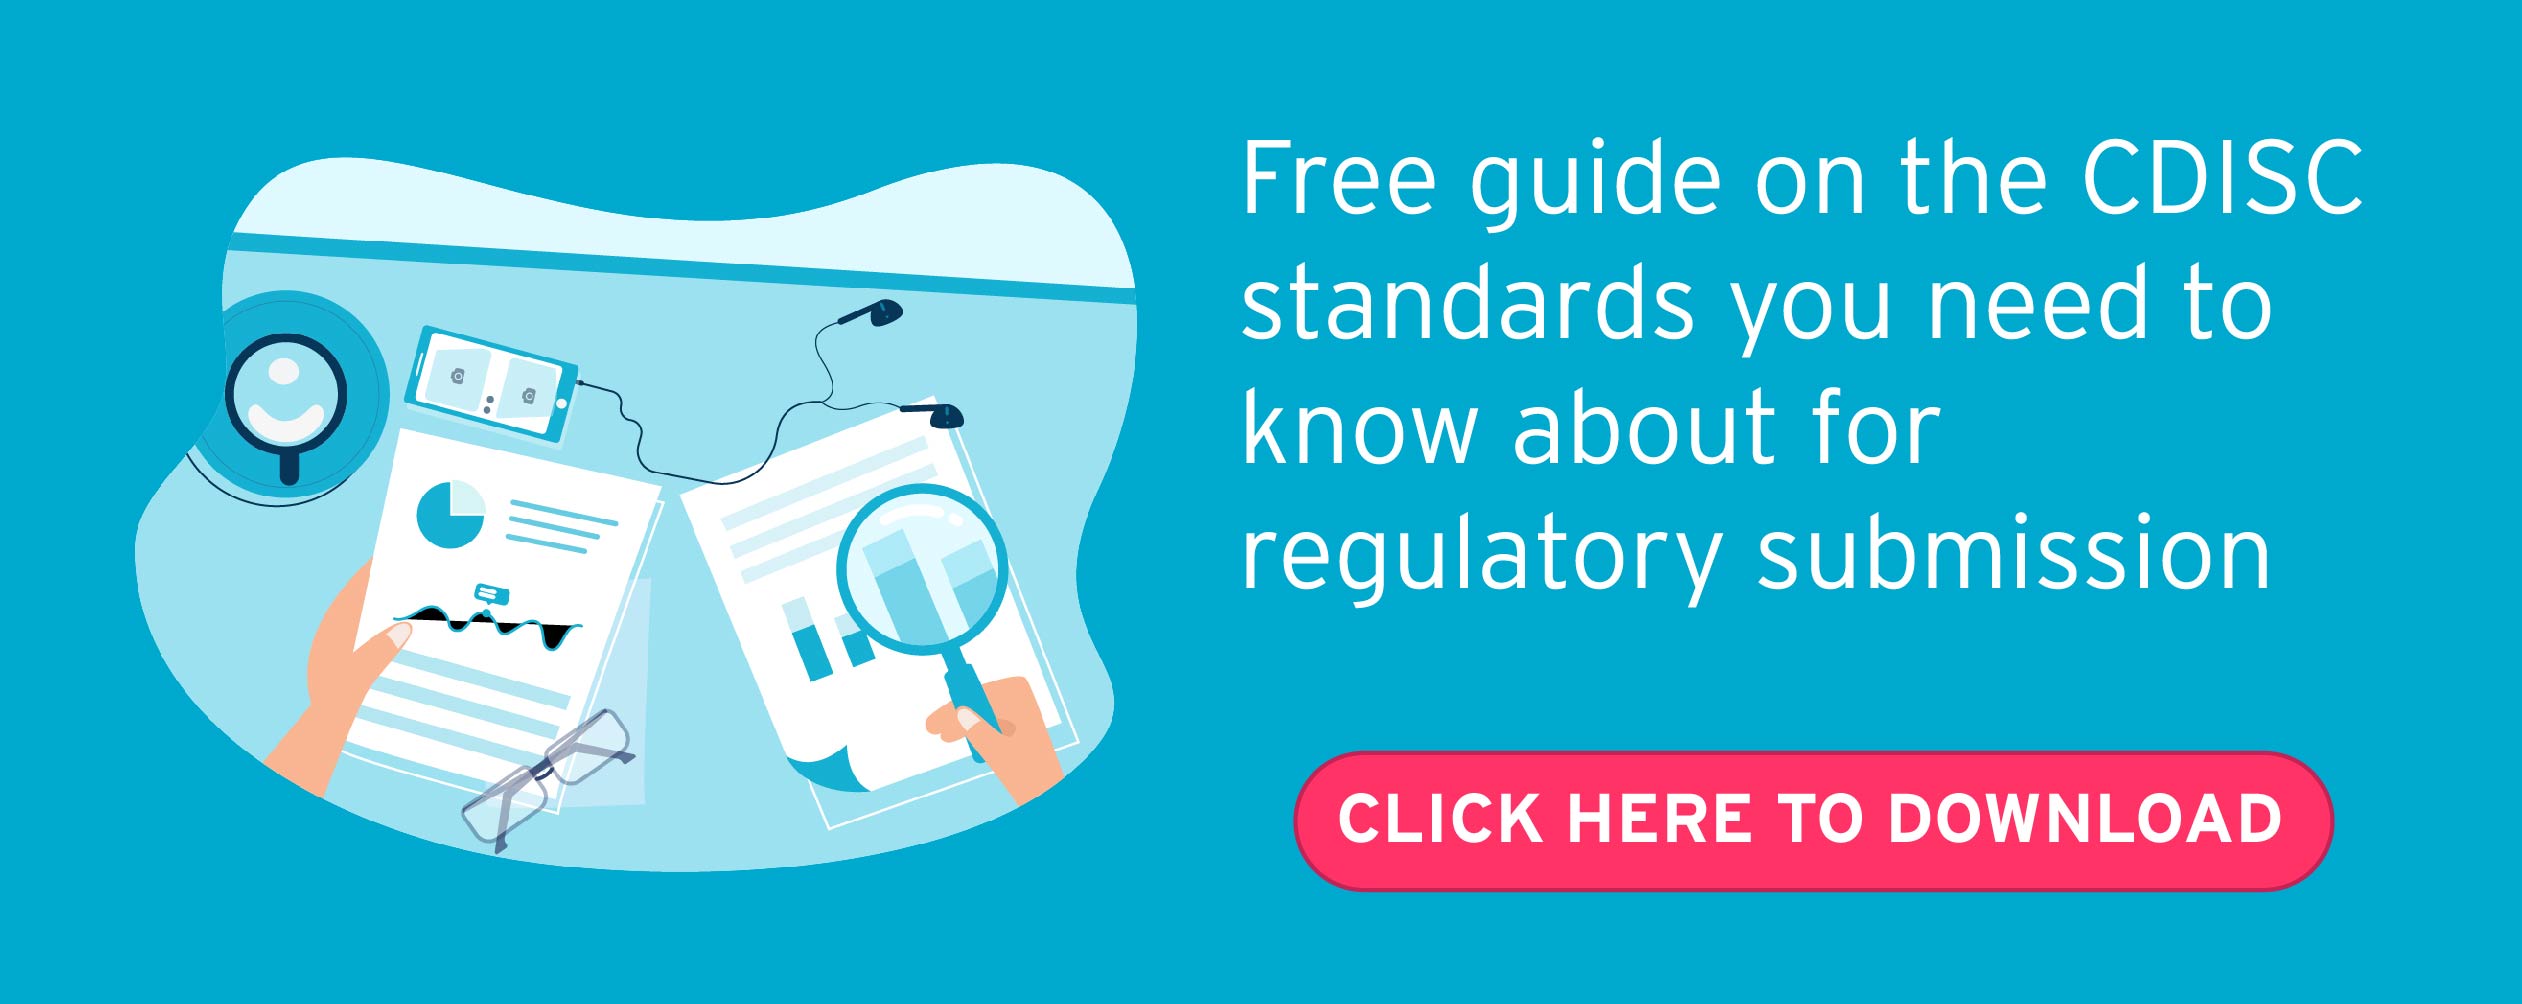 CDISC Standards Guide by Formedix